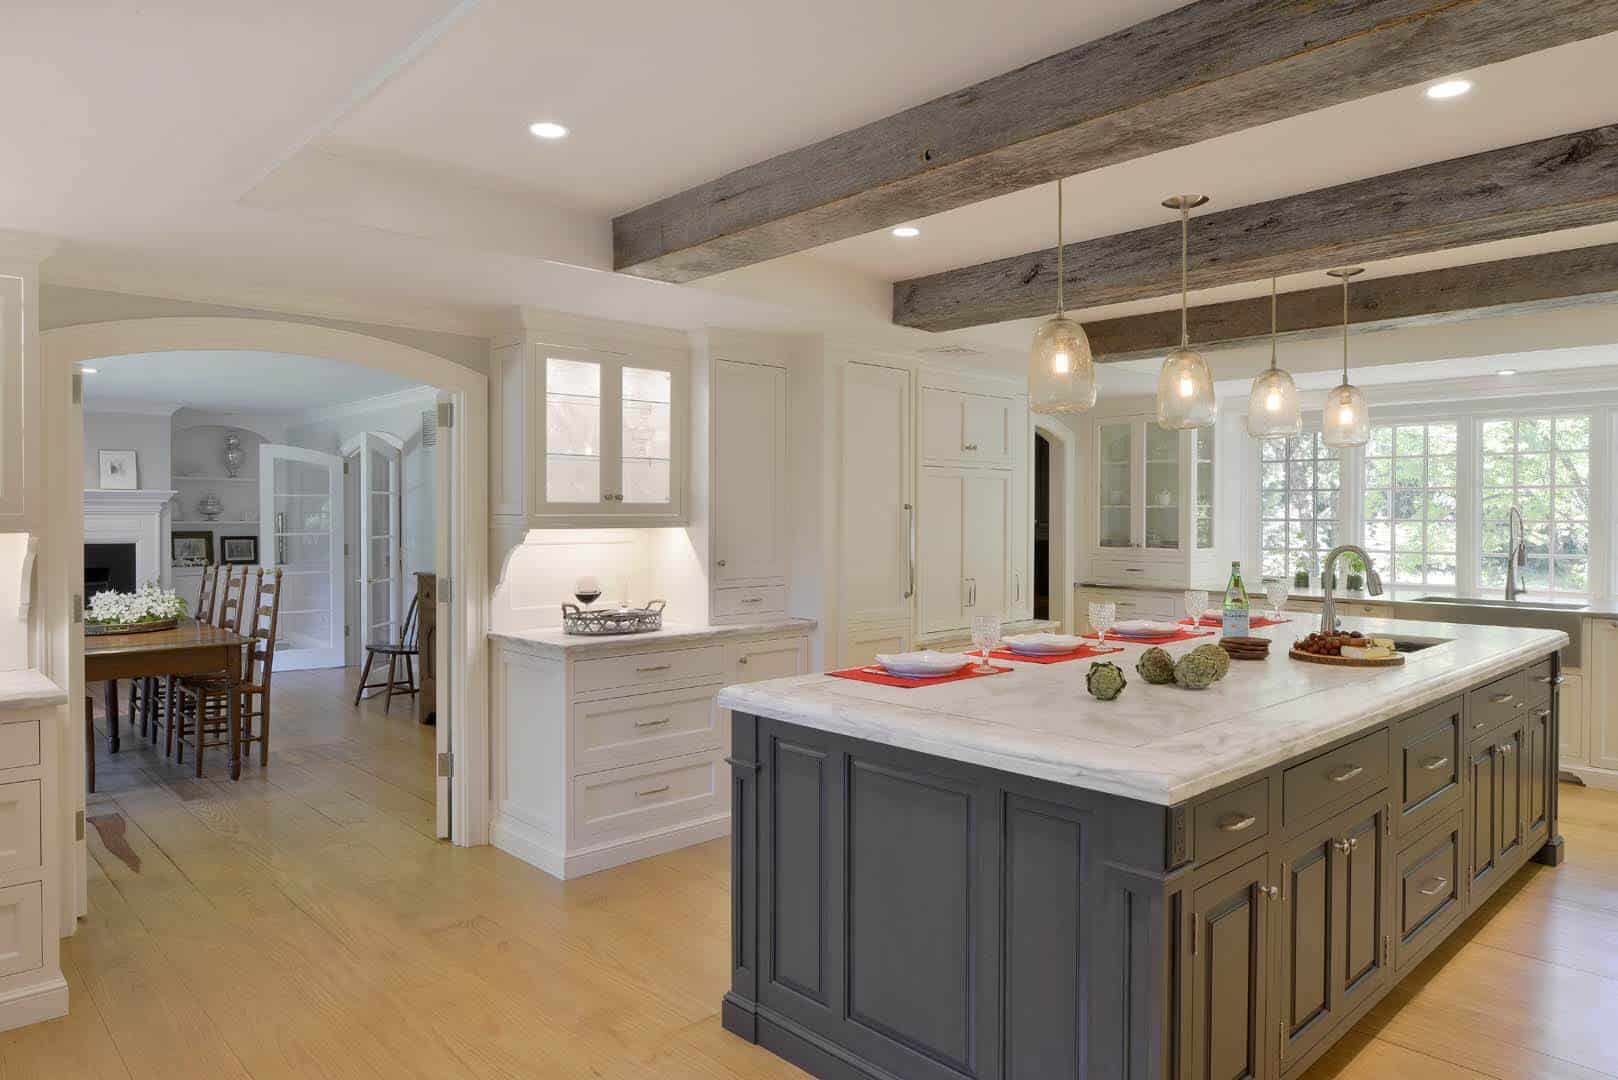 Expansive North Salem kitchen features exposed beams, white Bilotta cabinetry and large grey island with marble top.